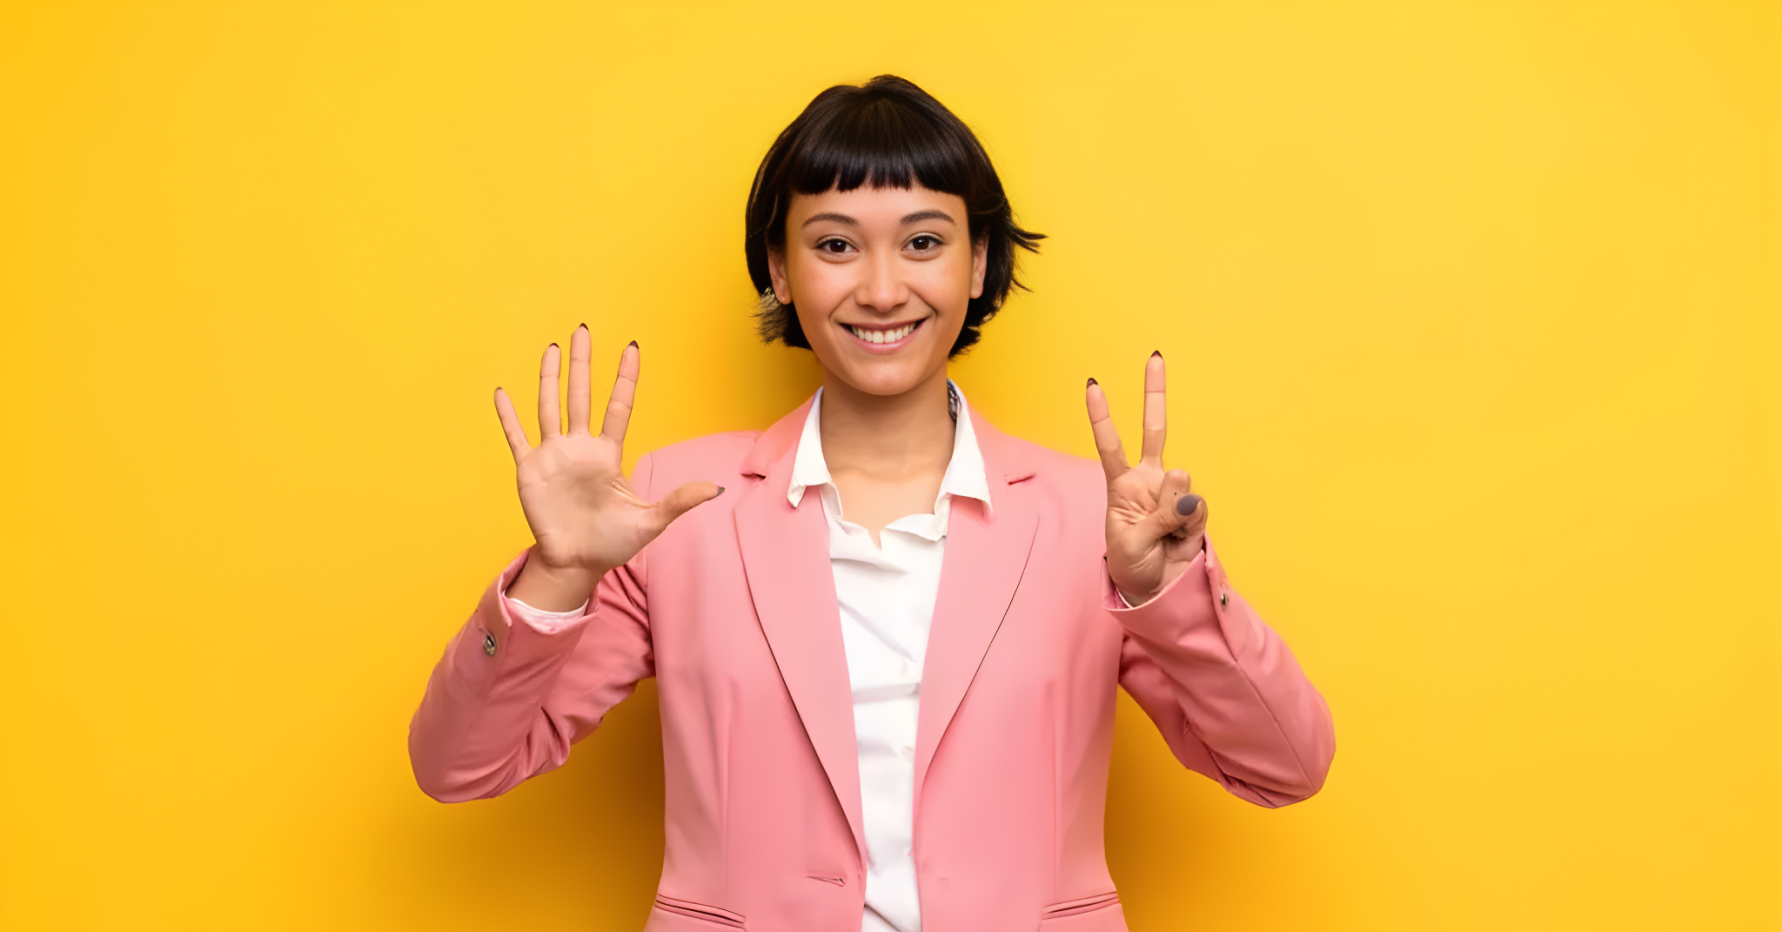 Photograph of a revenue leader holding up seven fingers